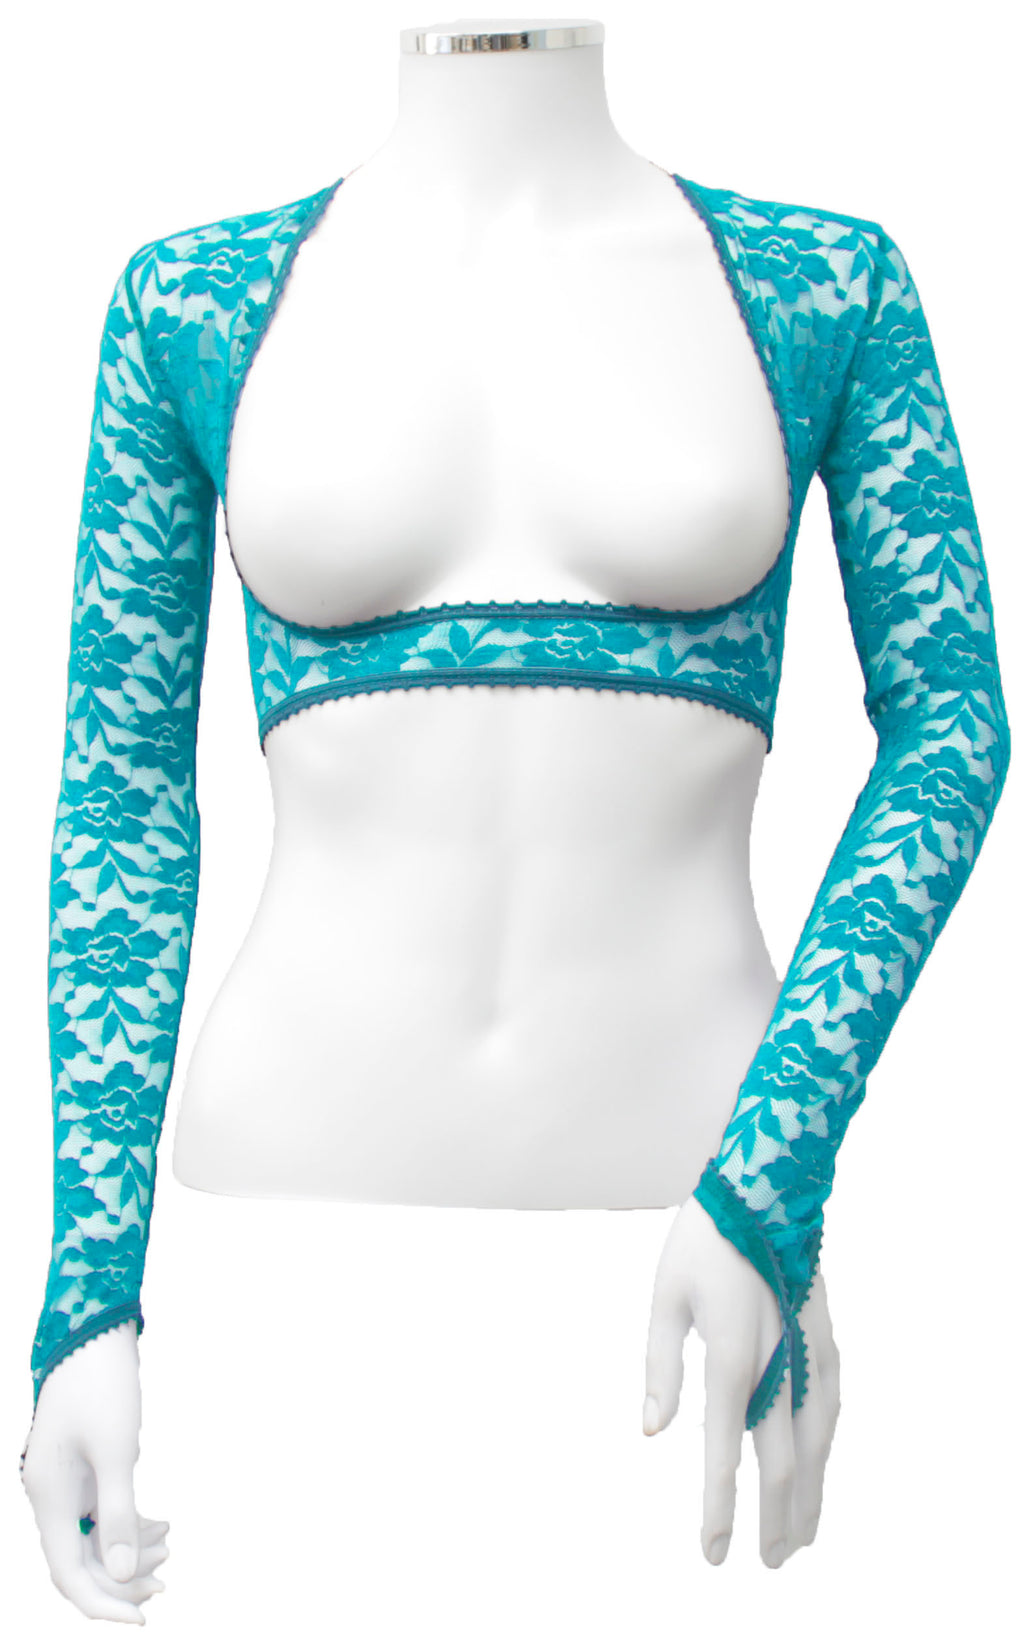 Turquoise Lace - Fabric